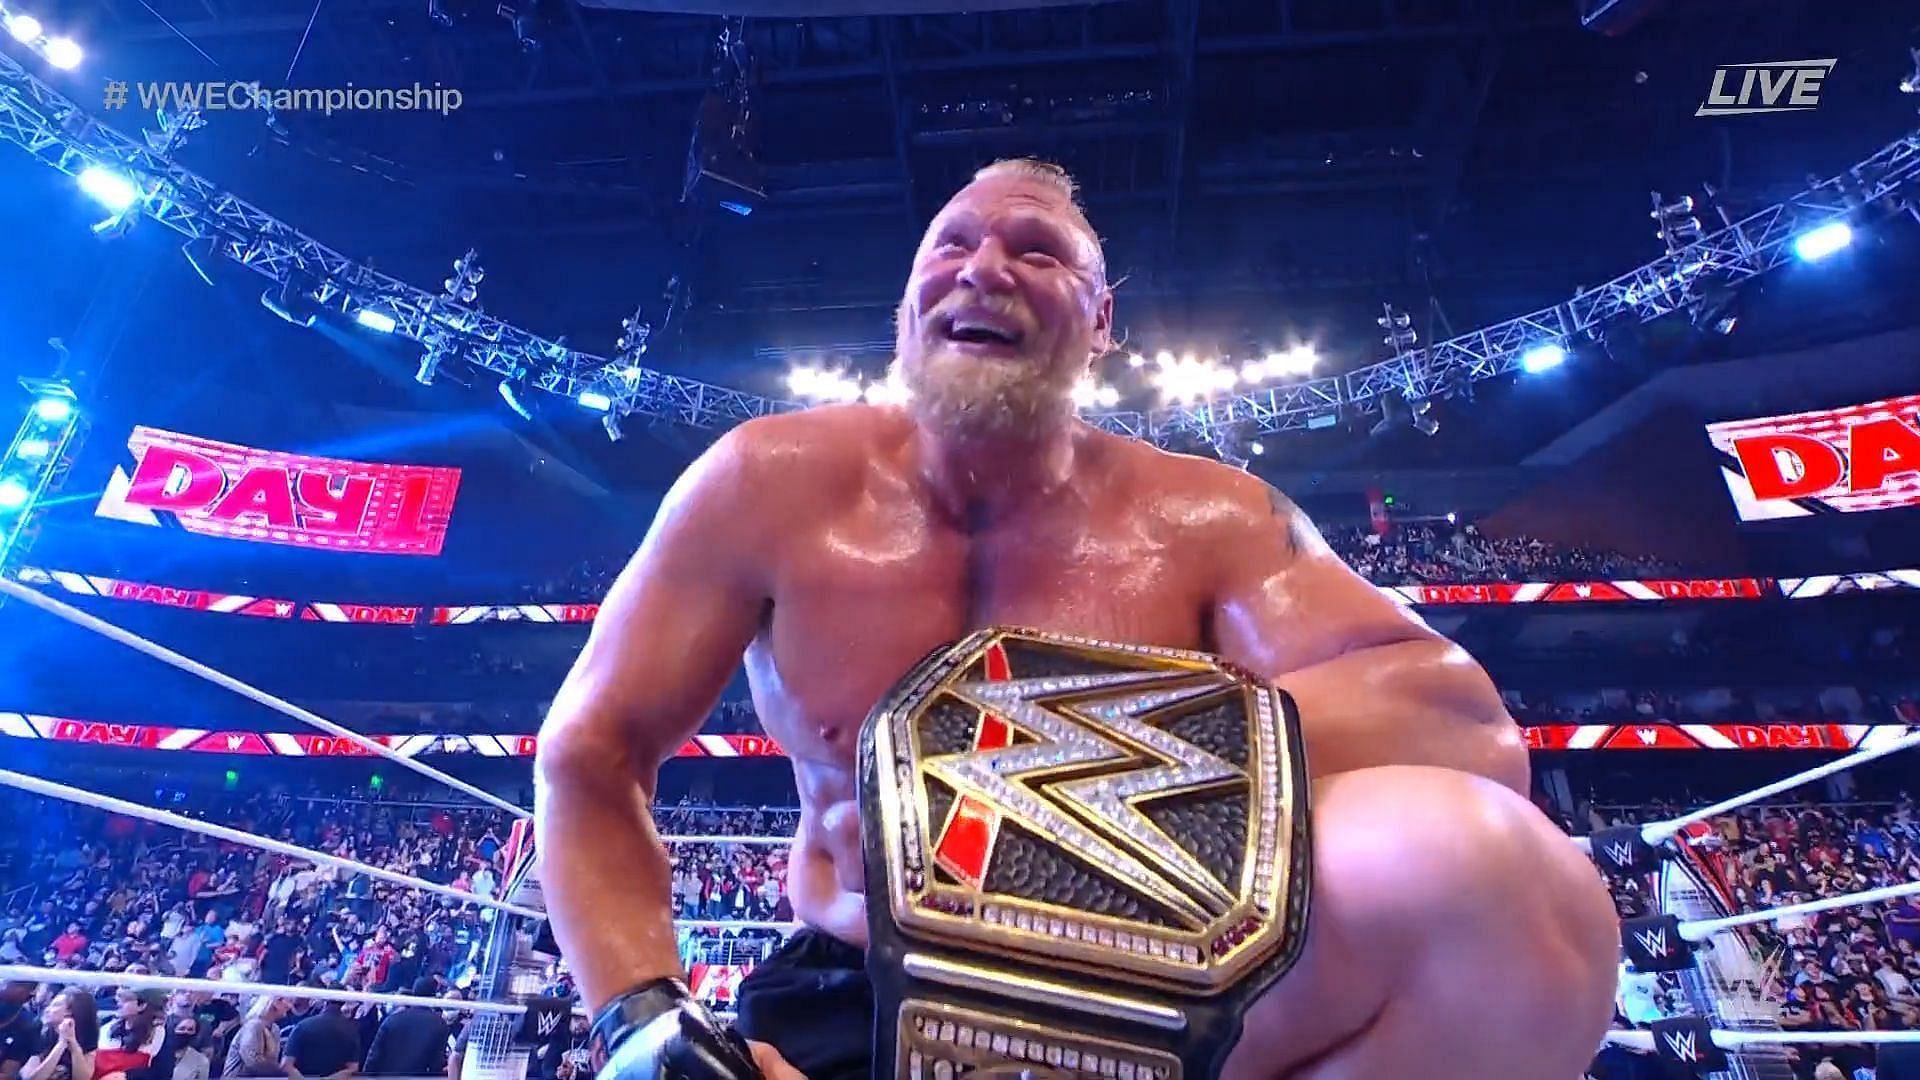 Brock Lesnar is the current WWE Champion in his seventh reign